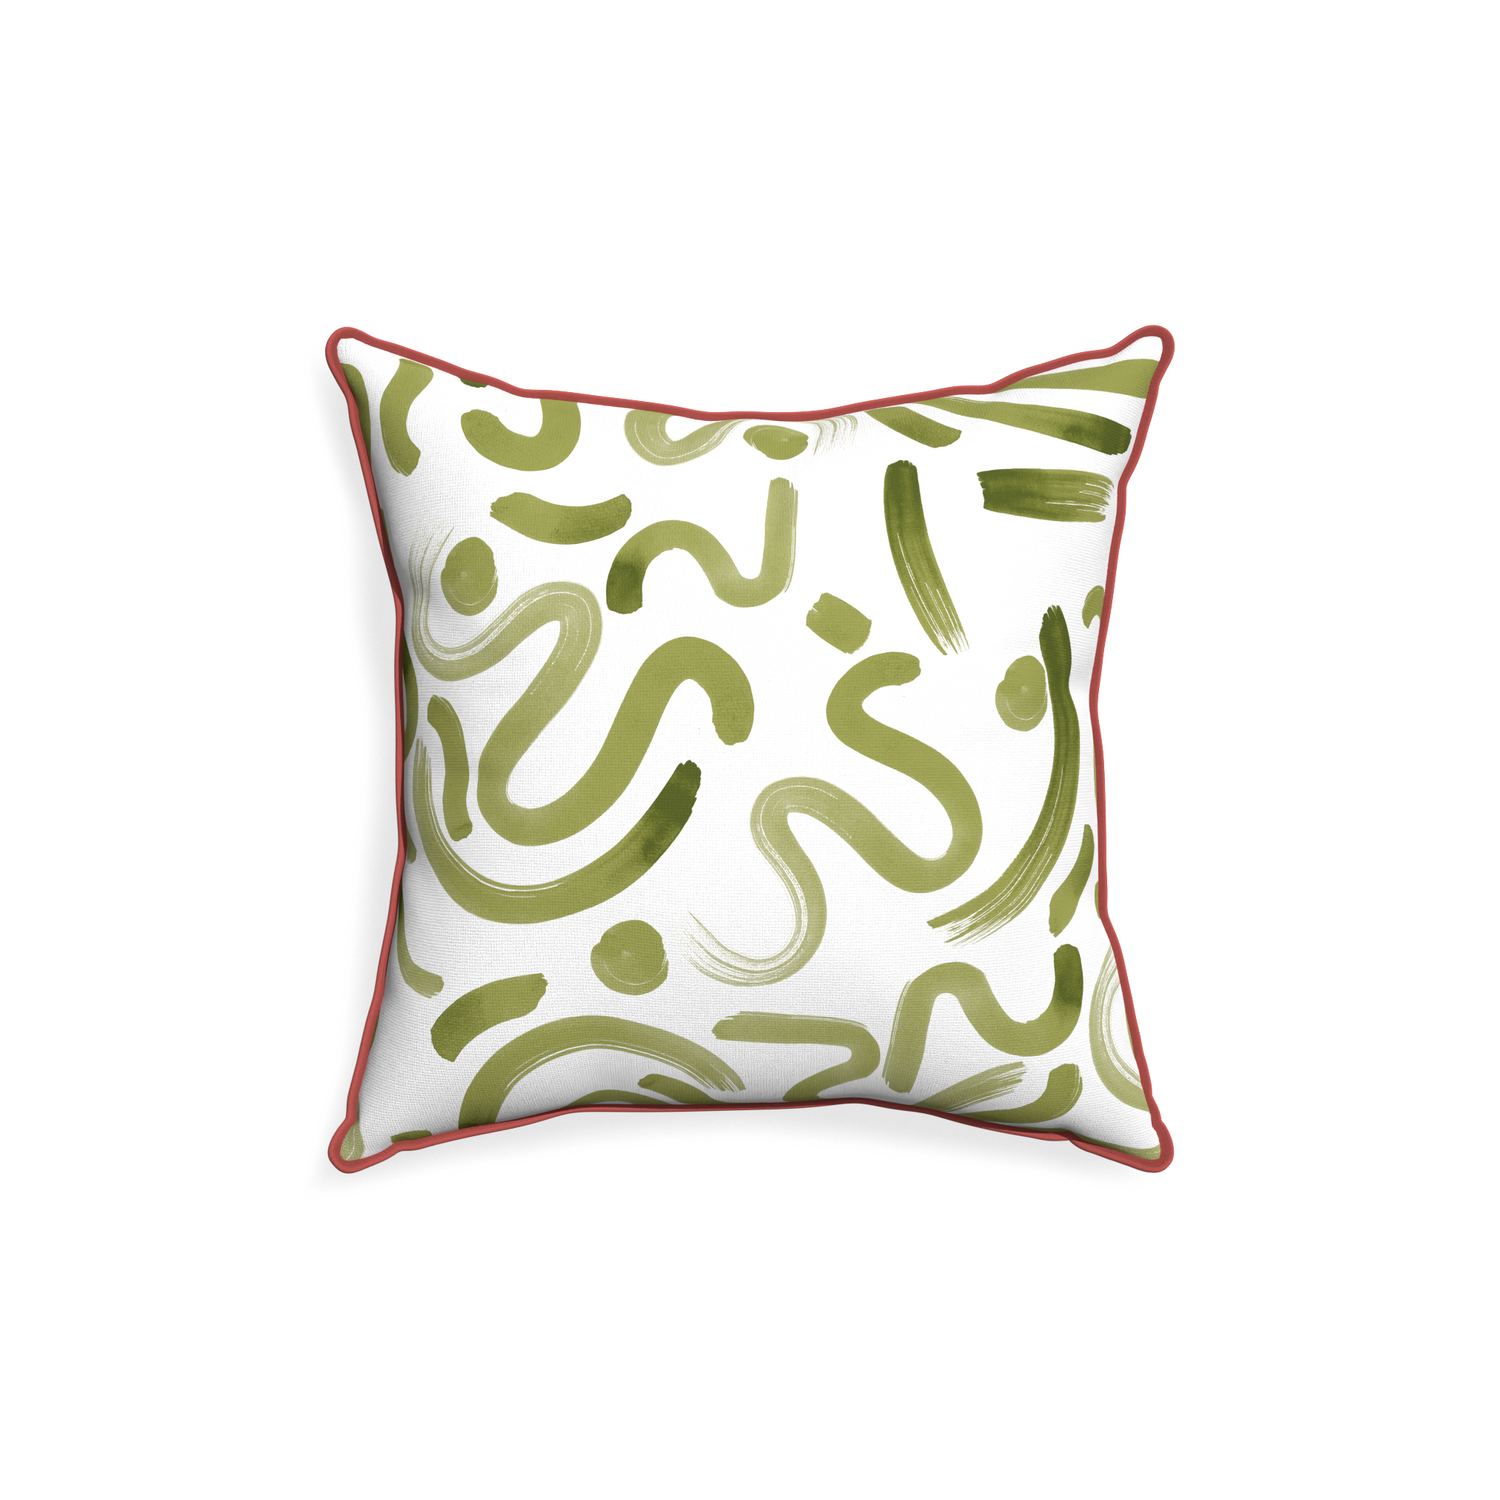 18-square hockney moss custom moss greenpillow with c piping on white background